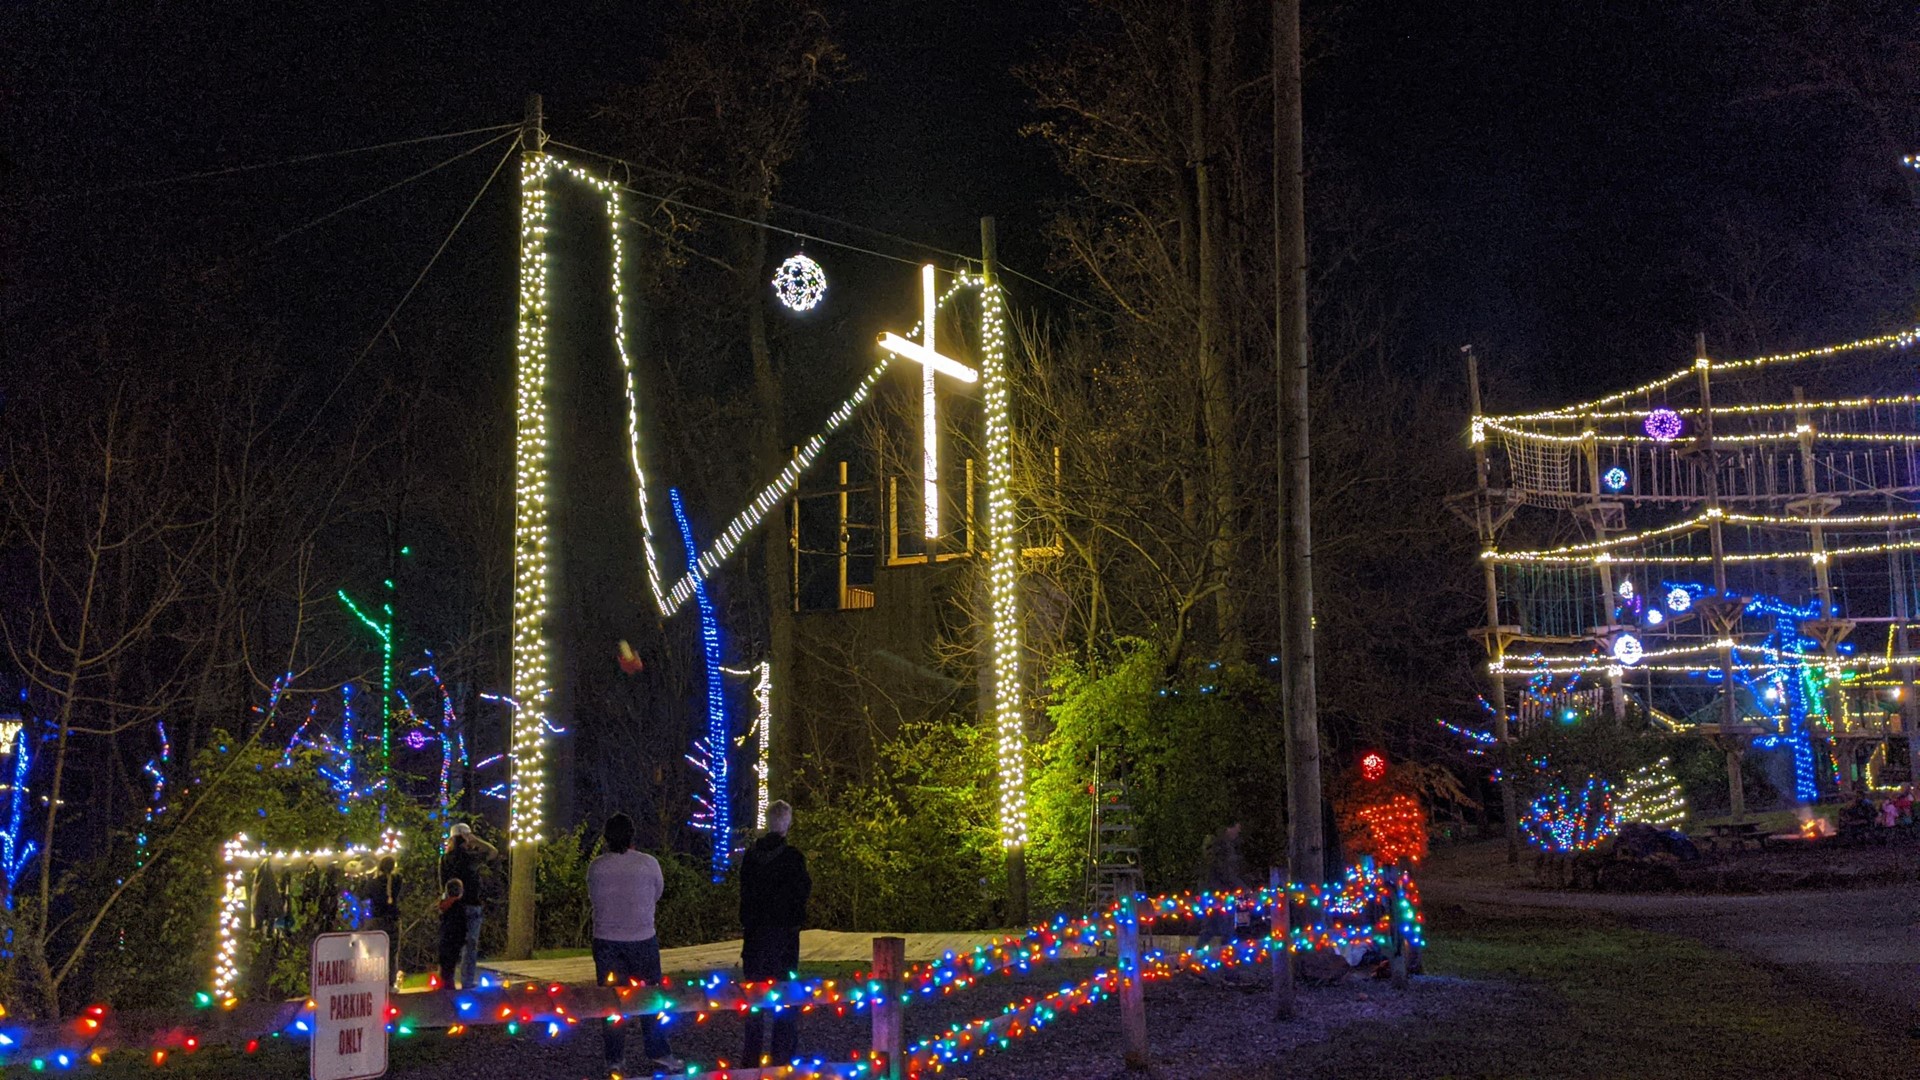 Refreshing Mountain Retreat and Adventure Center in Clay Township is holding its third annual #LightForAll Drive Thru light display Nov. 27 to Dec. 10.